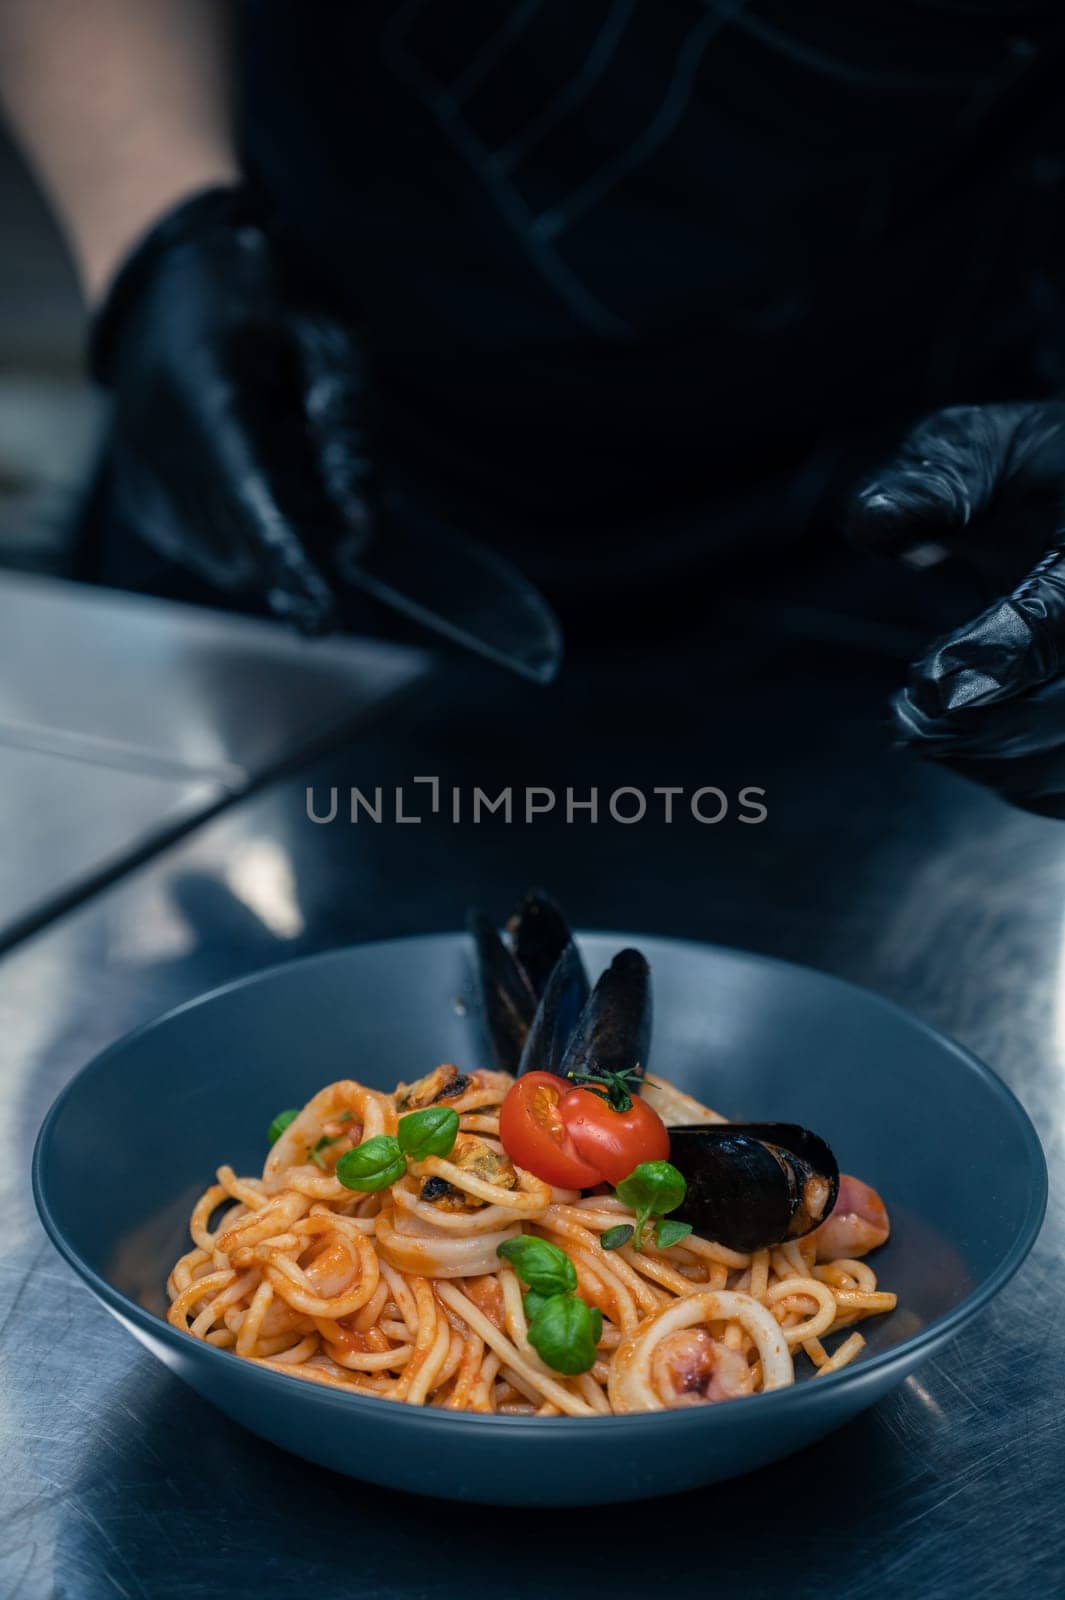 Chef preparing Seafood Pasta with mussels with basil and tomato in black plate